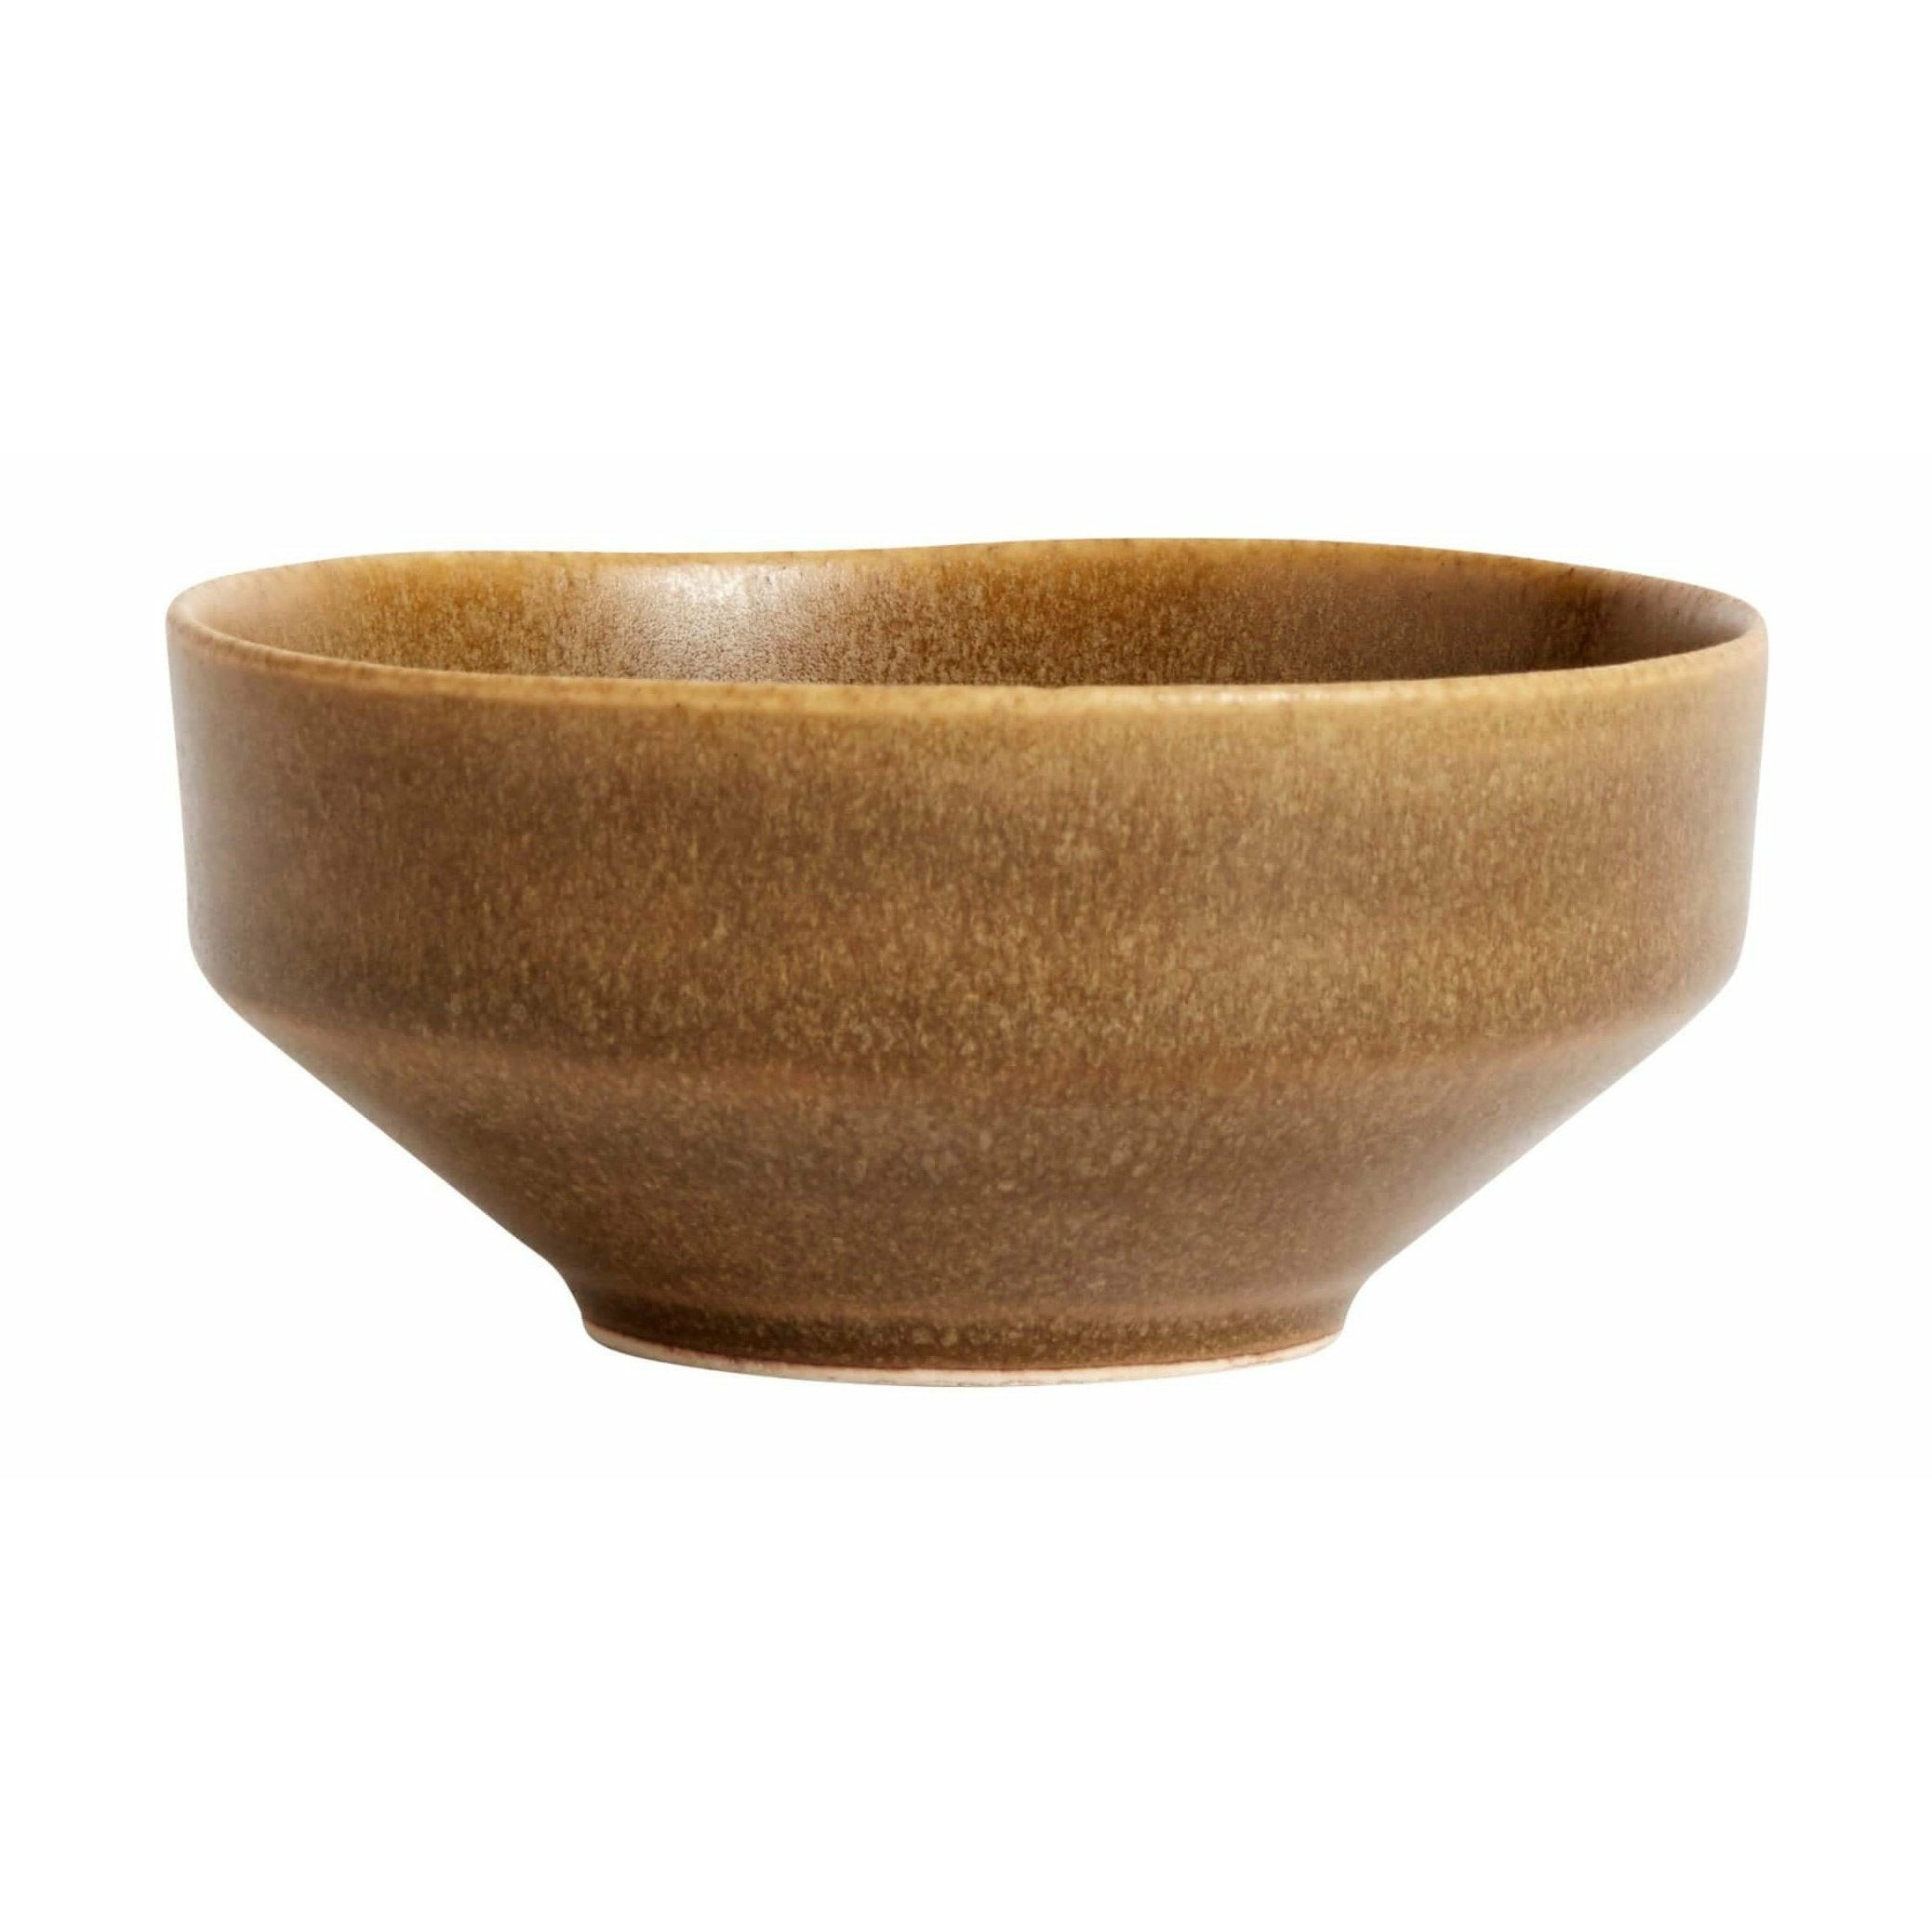 Muubs Ceto Dip Bowl -mosterd, 11 cm